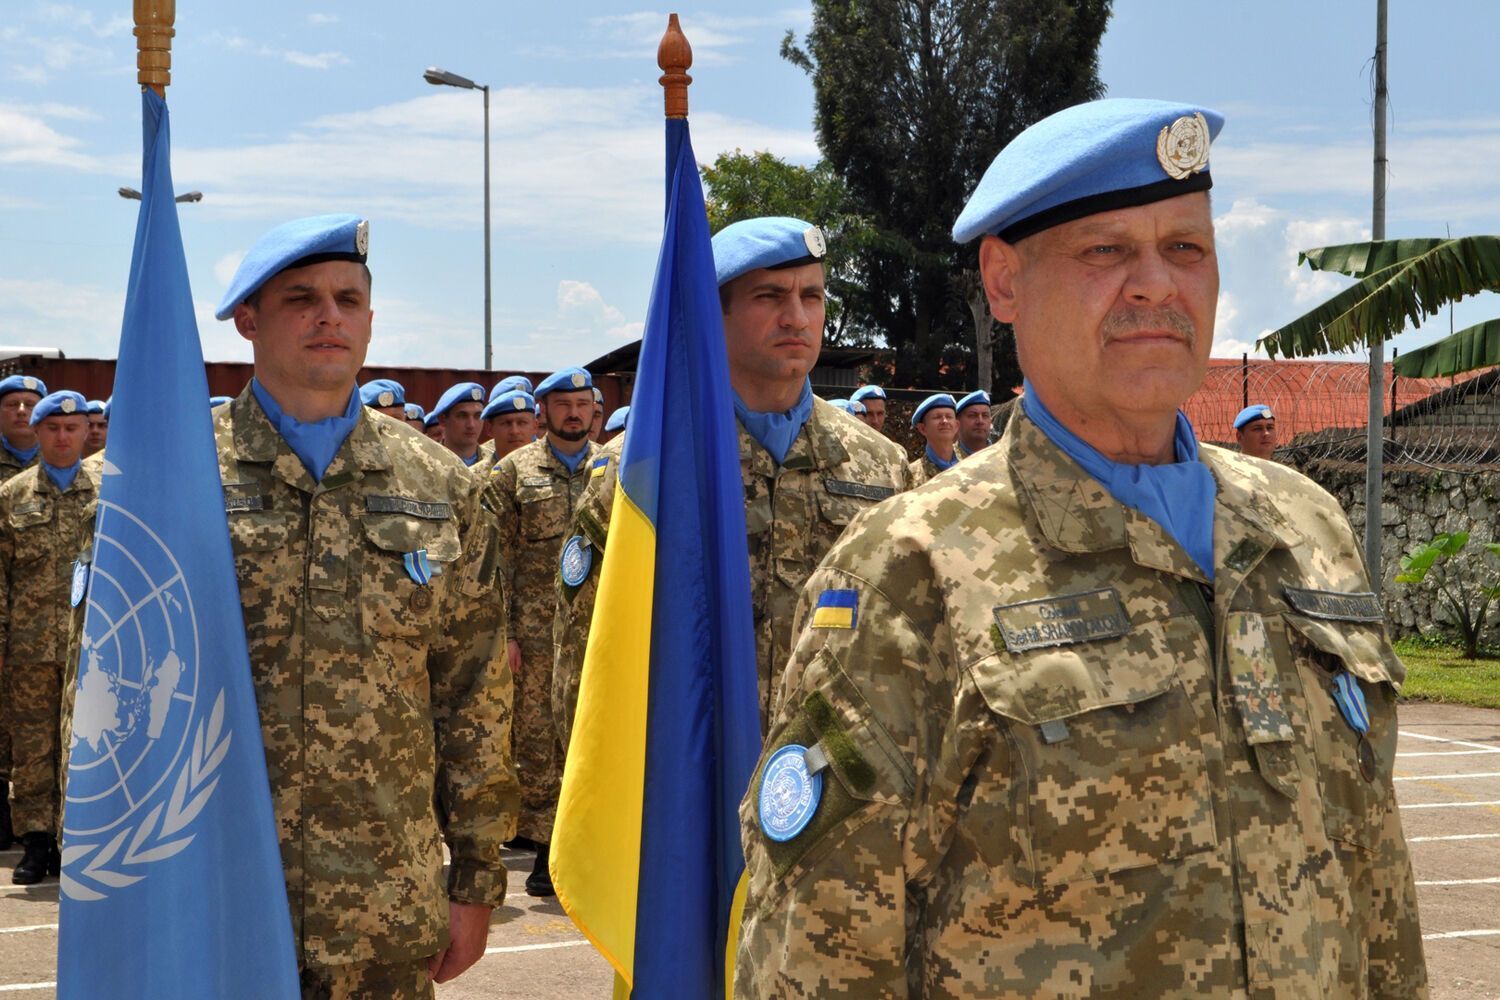 Minimum 27 operations: in which peacekeeping and rescue missions Ukraine participated